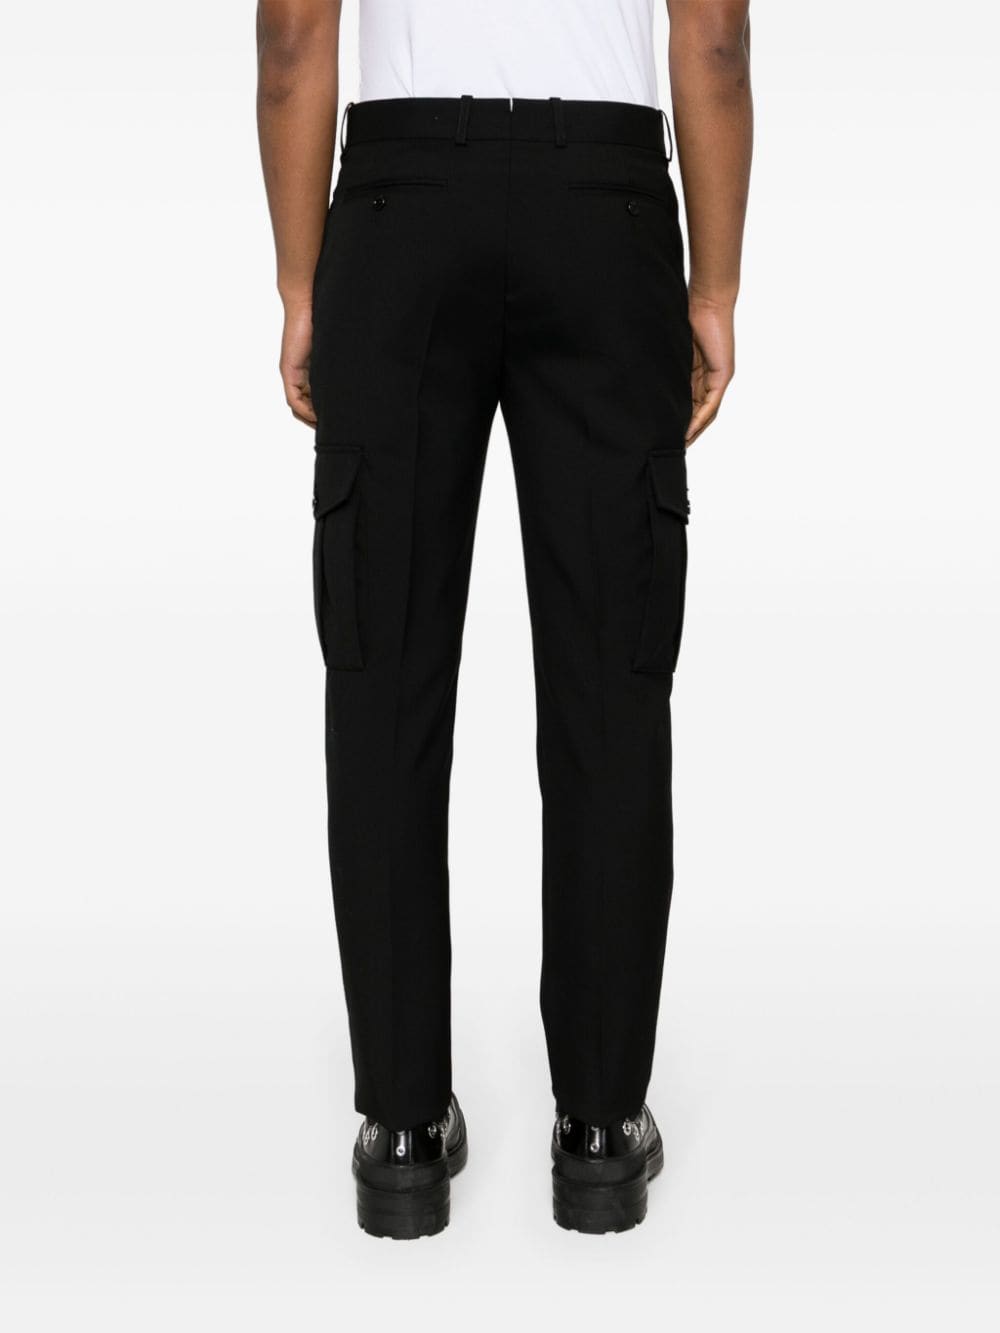 Black tailored design trousers